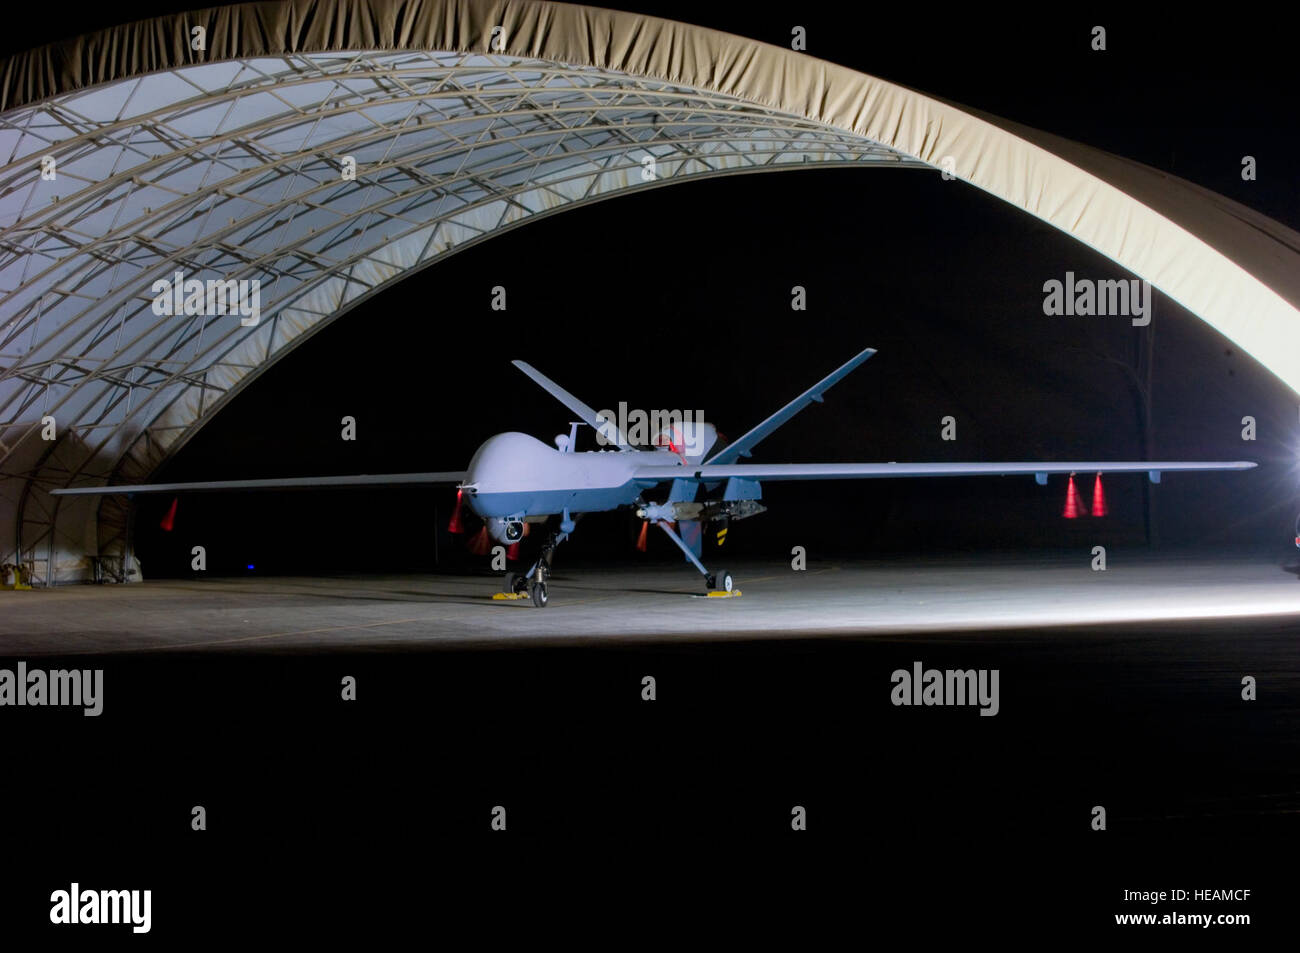 An armed MQ-9 Reaper unmanned aircraft sits in a shelter Oct. 15 at Joint Base Balad, Iraq, before a mission. Larger and more powerful than the MQ-1 Predator, the Reaper can carry up to 3,750 pounds of laser-guided bombs and Hellfire missiles. Tech. Sgt. Erik Gudmundson) Stock Photo